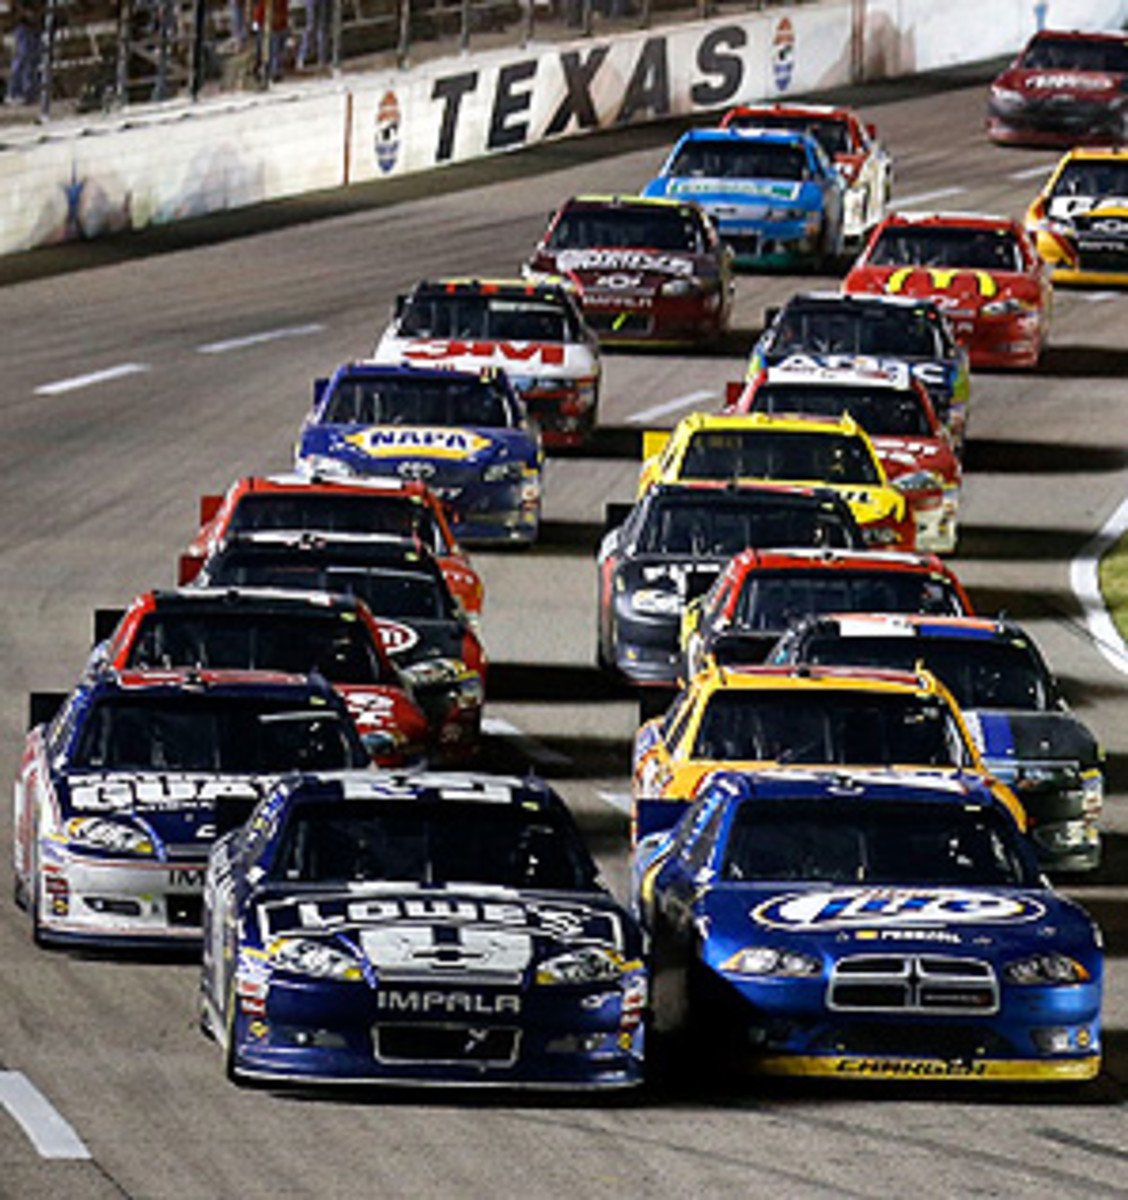 Dustin Long: How has NASCAR's Chase for the Sprint Cup changed the